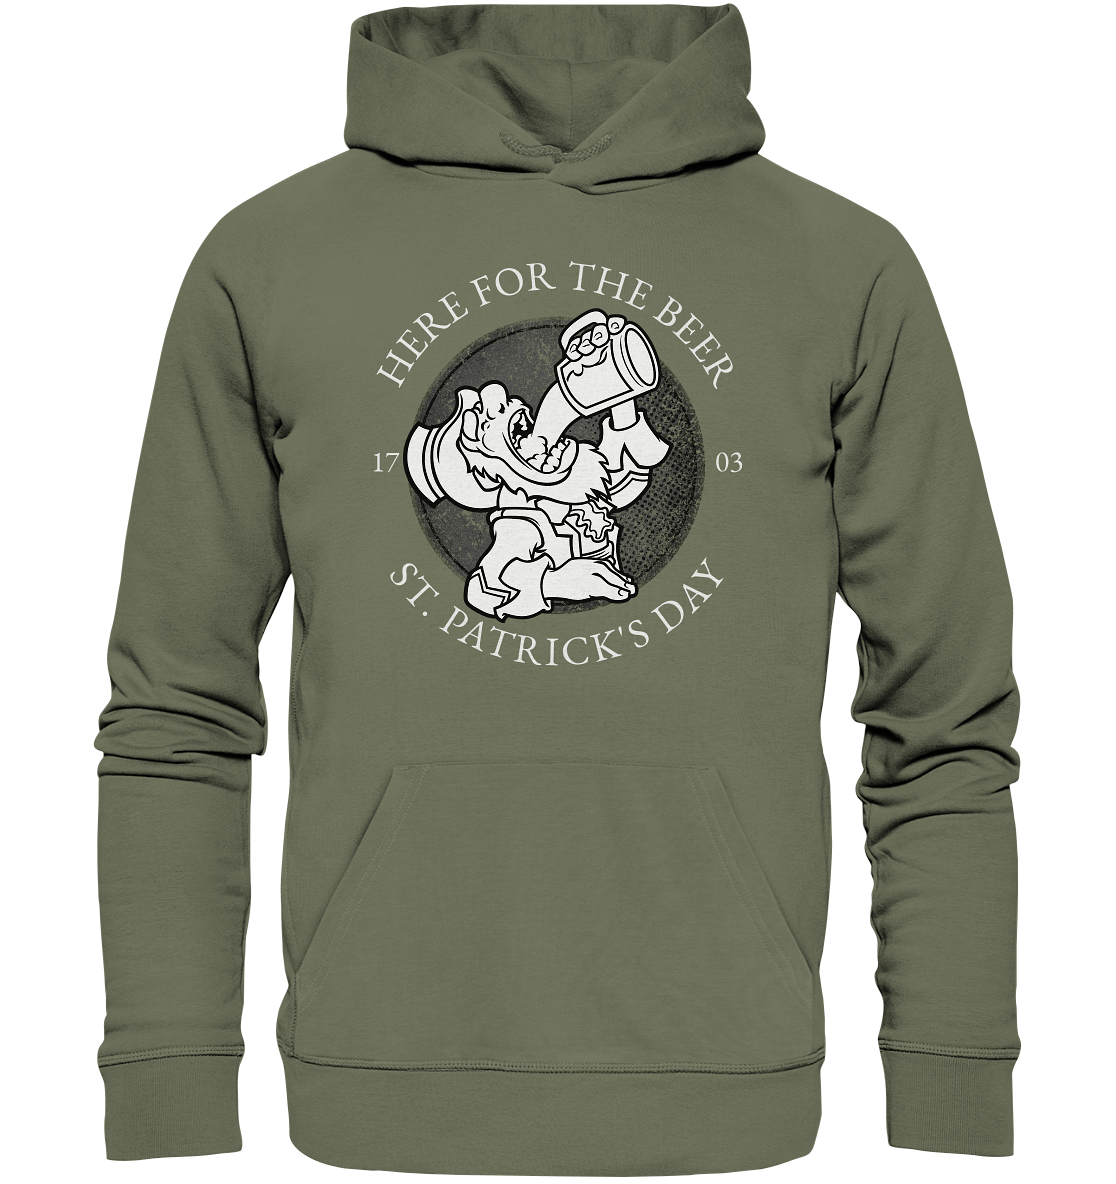 Here For The Beer "St. Patrick's Day" - Premium Unisex Hoodie